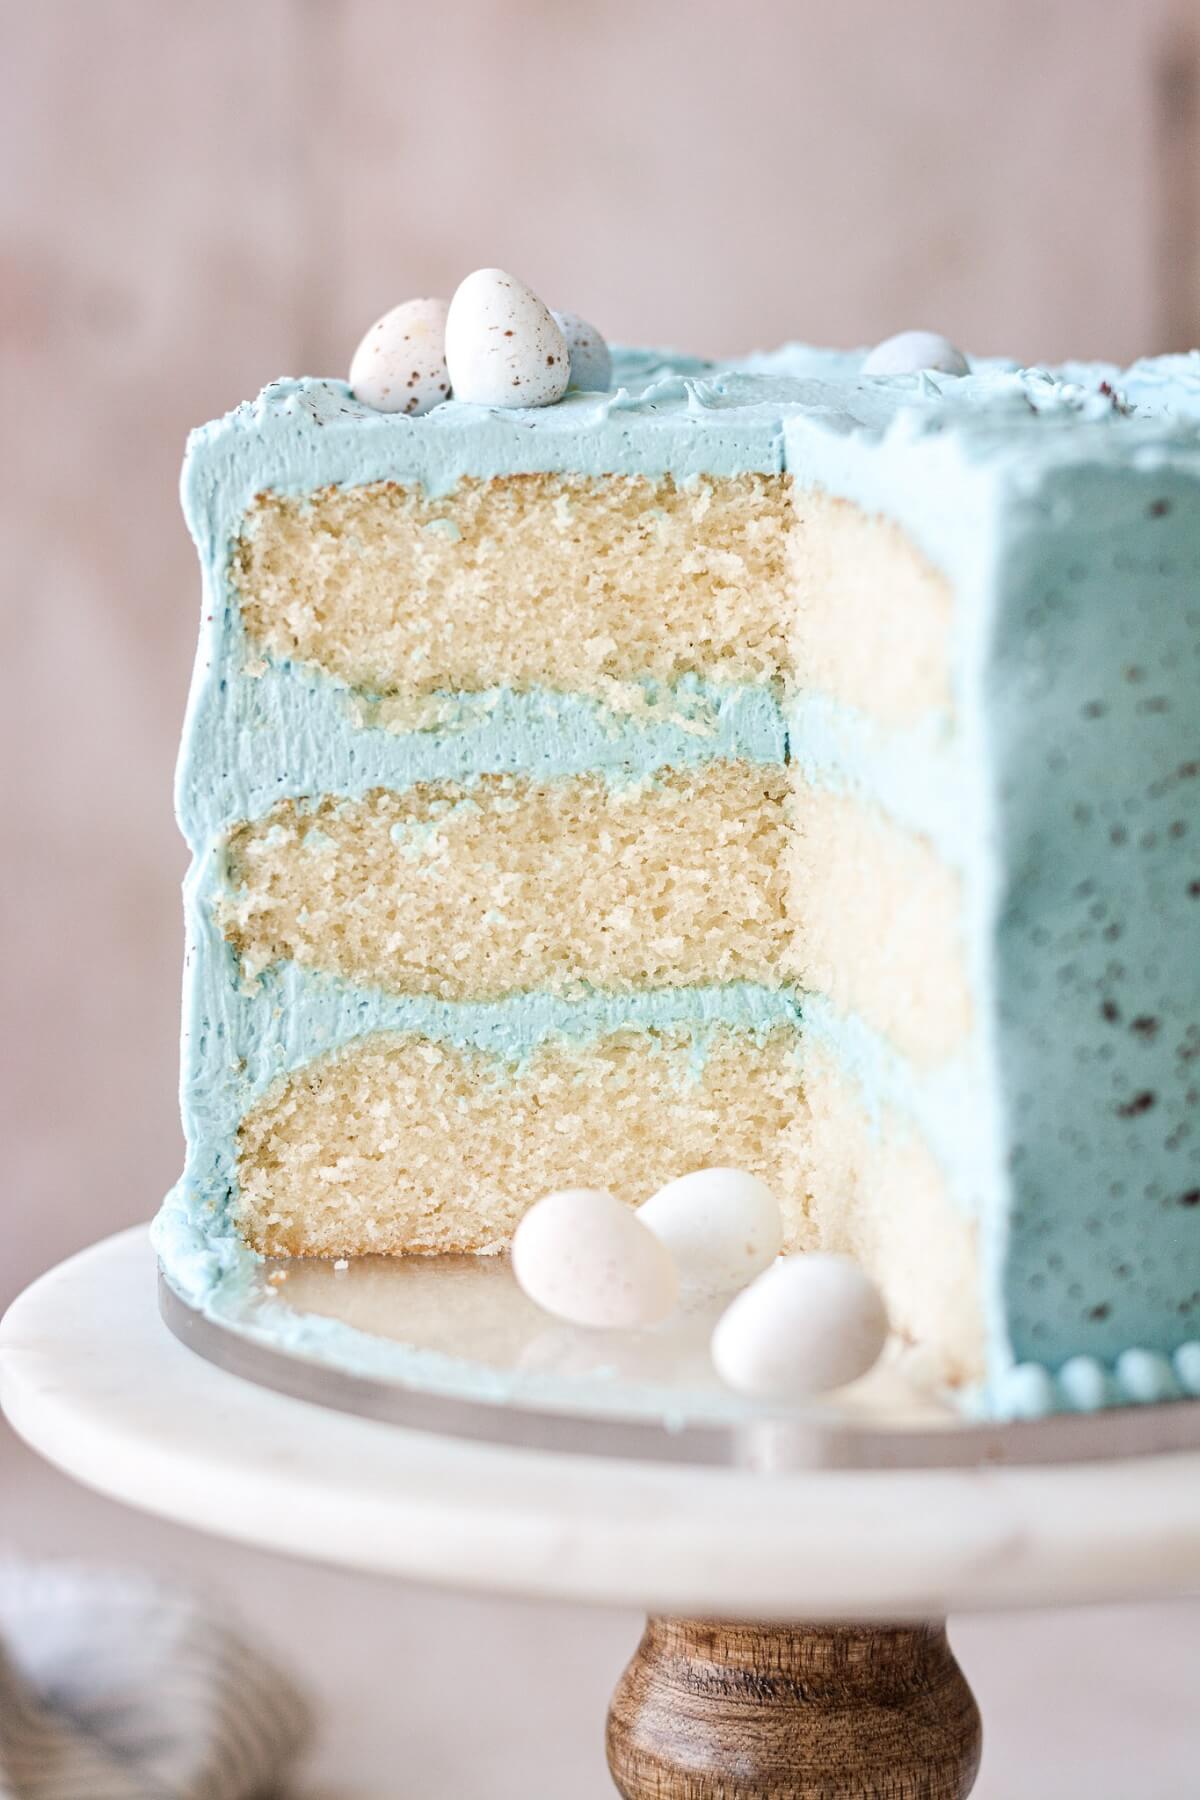 Malted milk cake with blue buttercream with a slice cut.